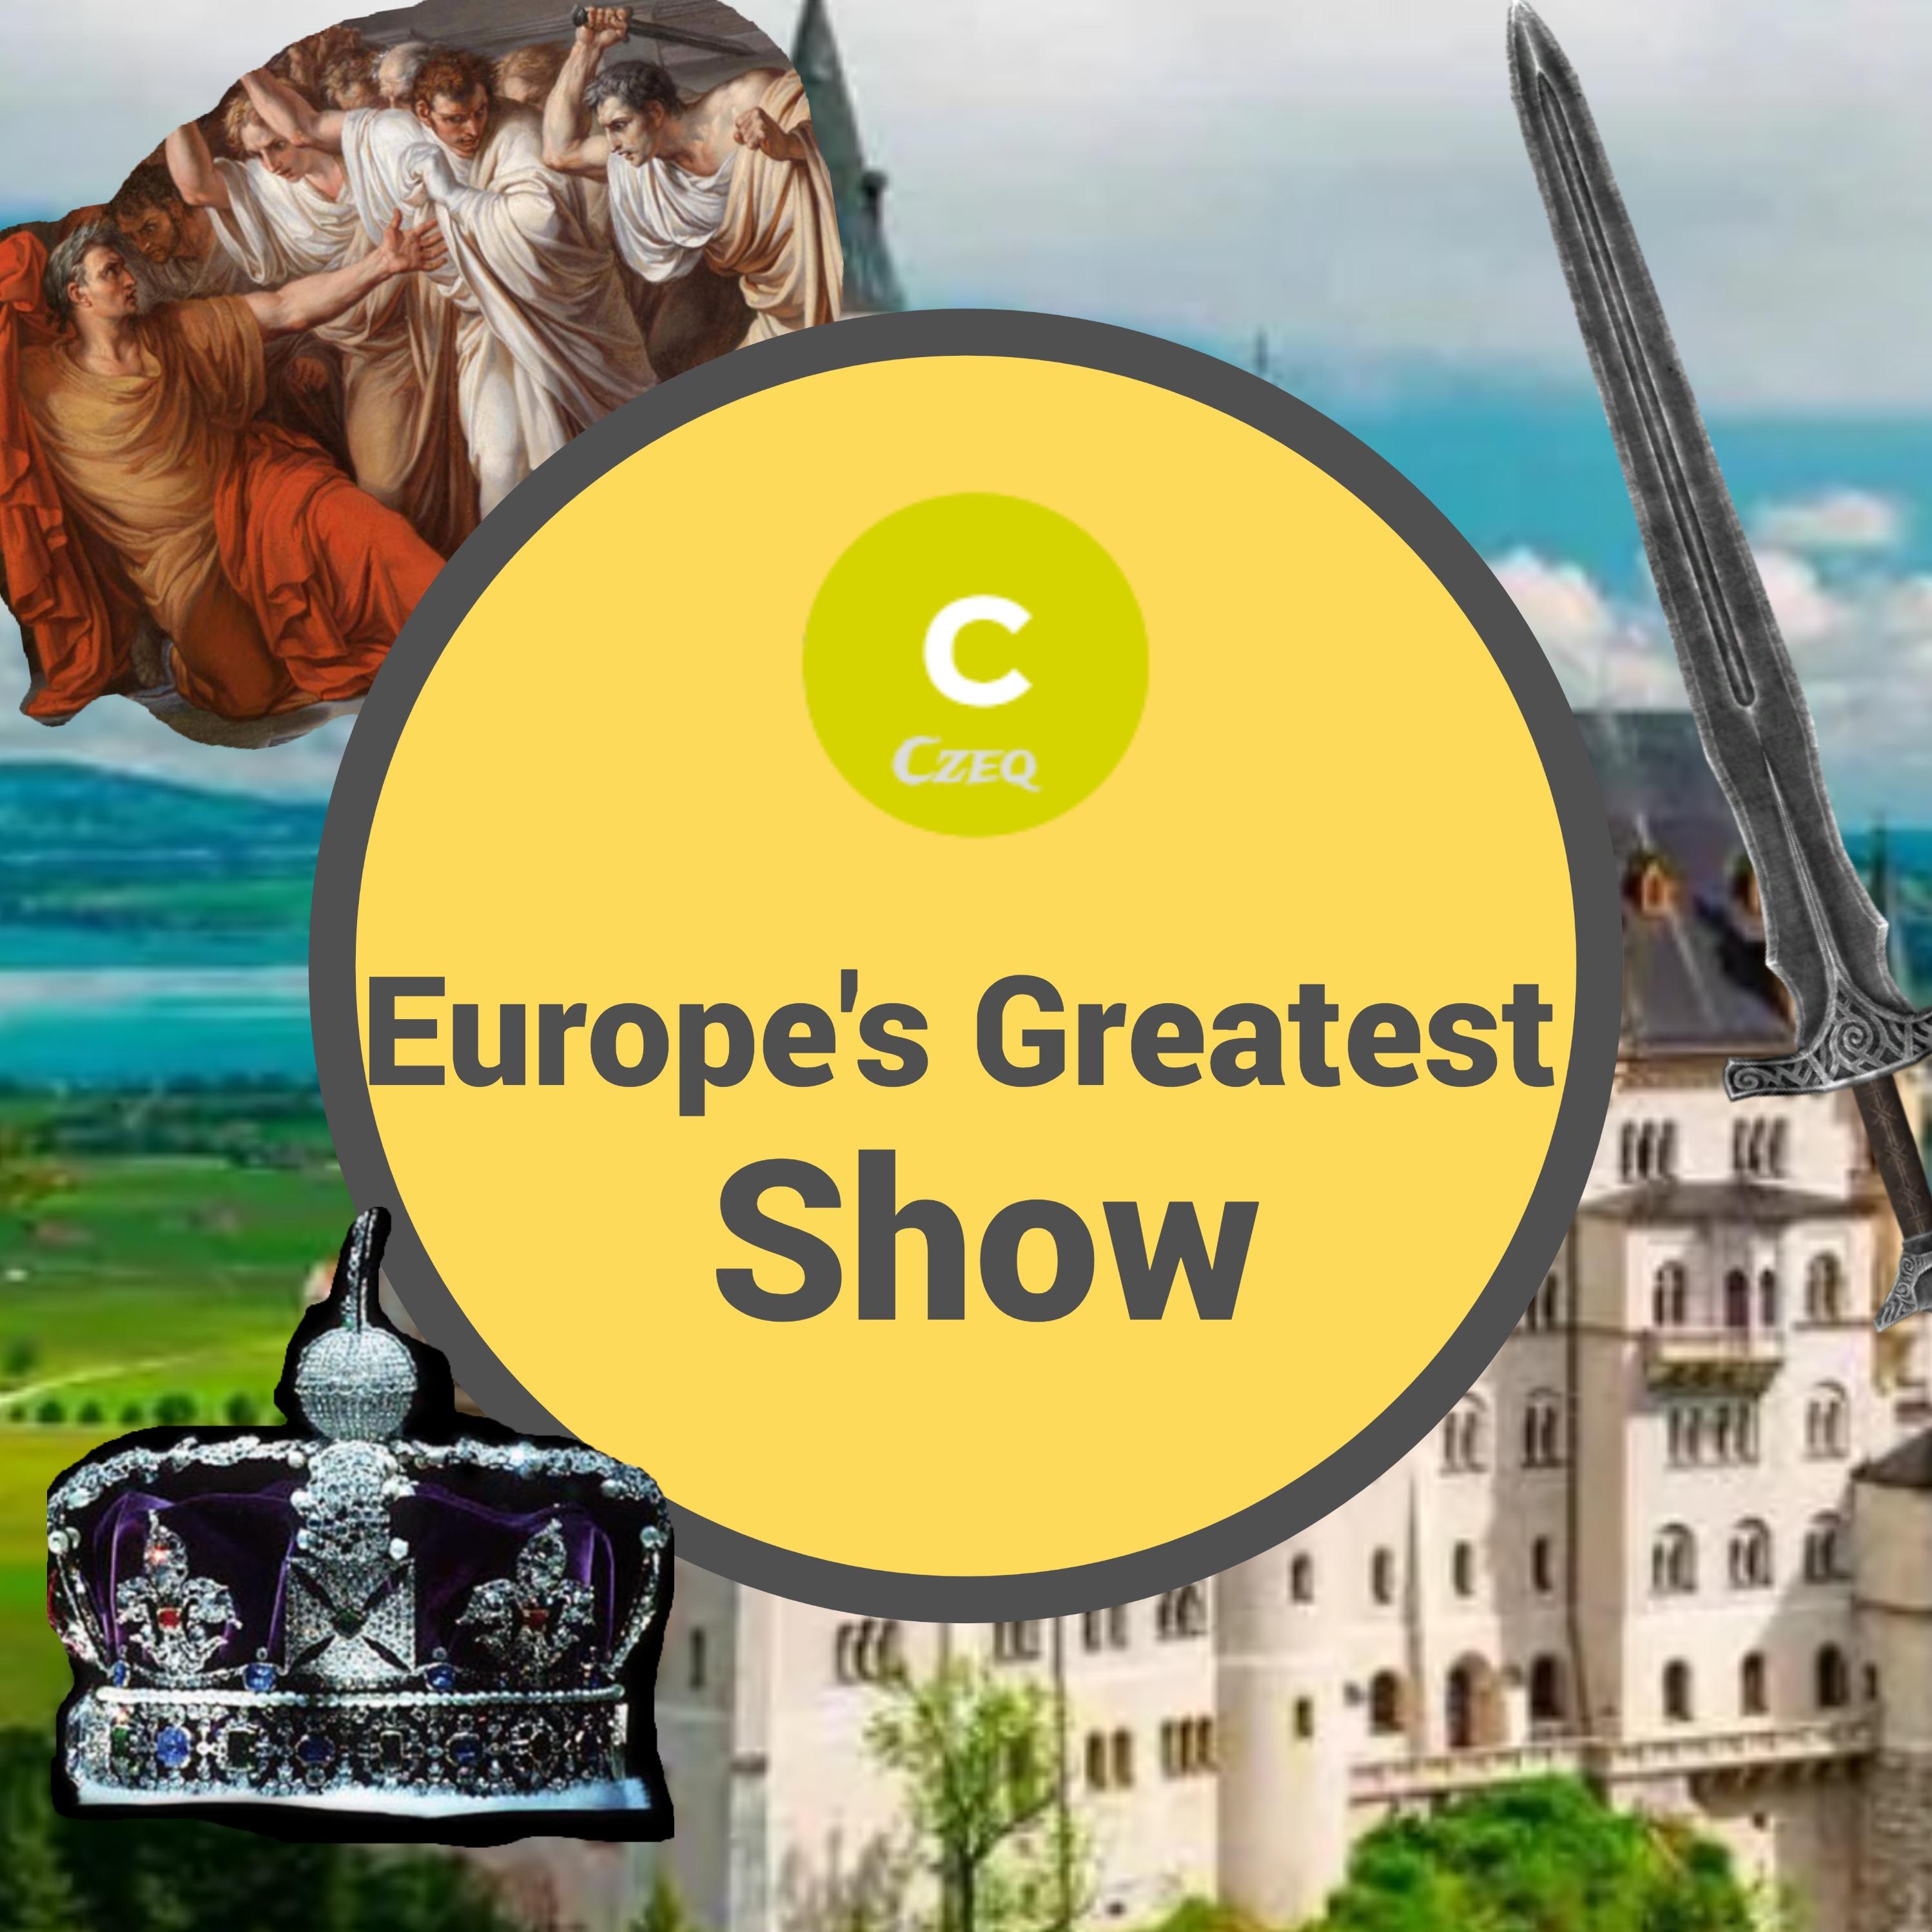 Europe's greatest shows